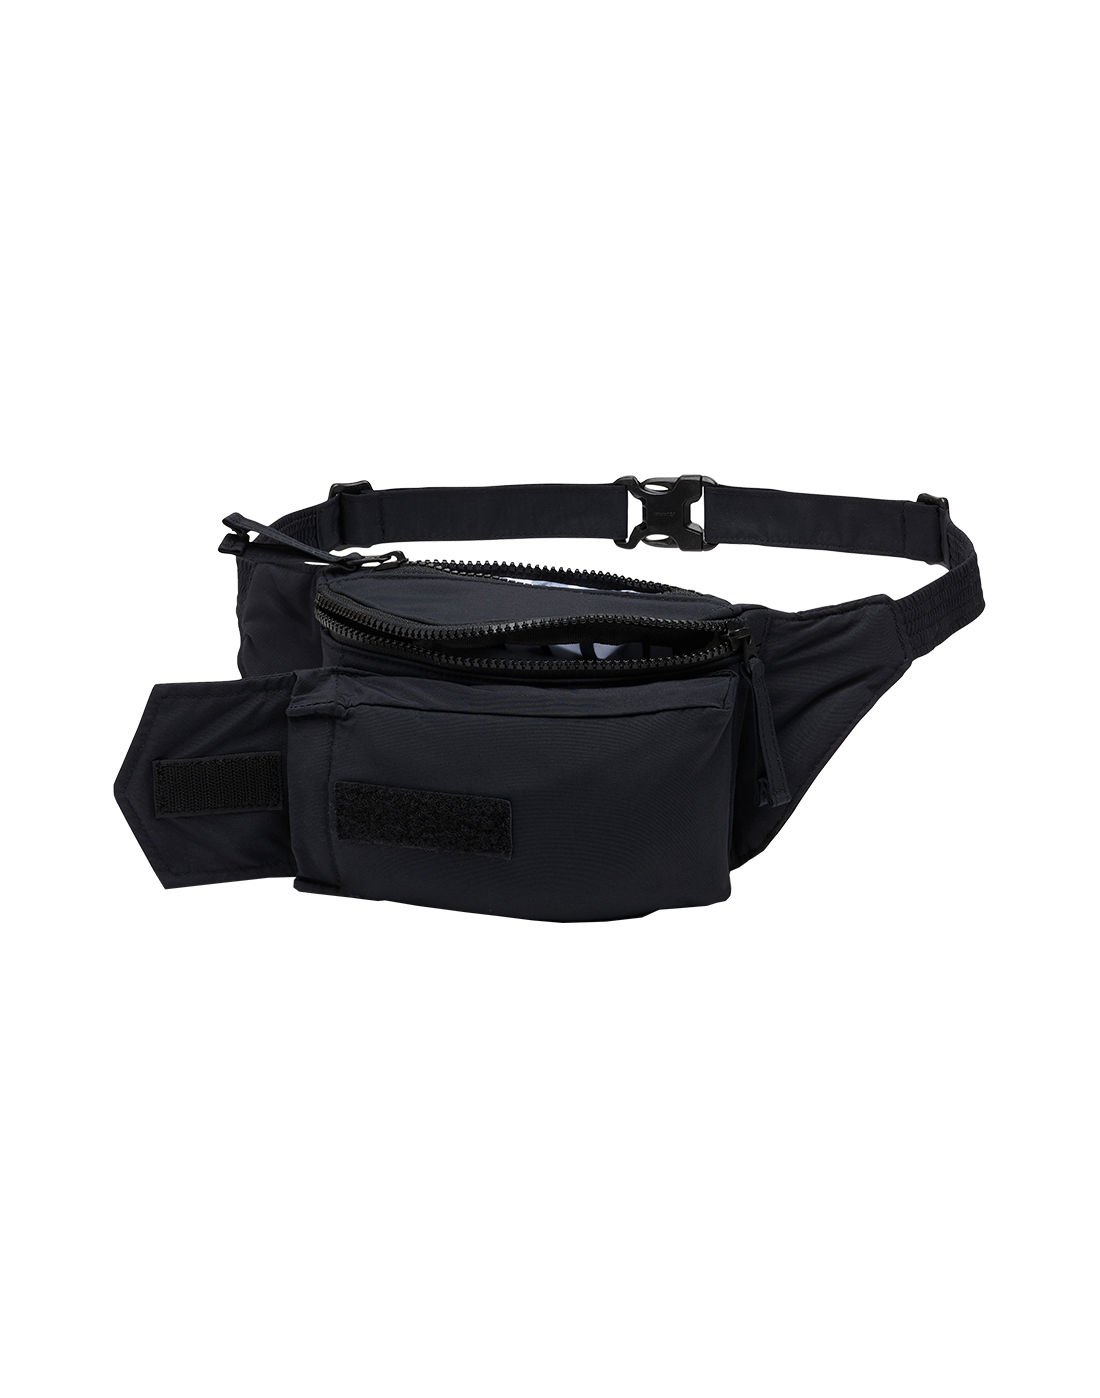 Columbia POPO Pack Waistbag - Black | Life Style Sports IE